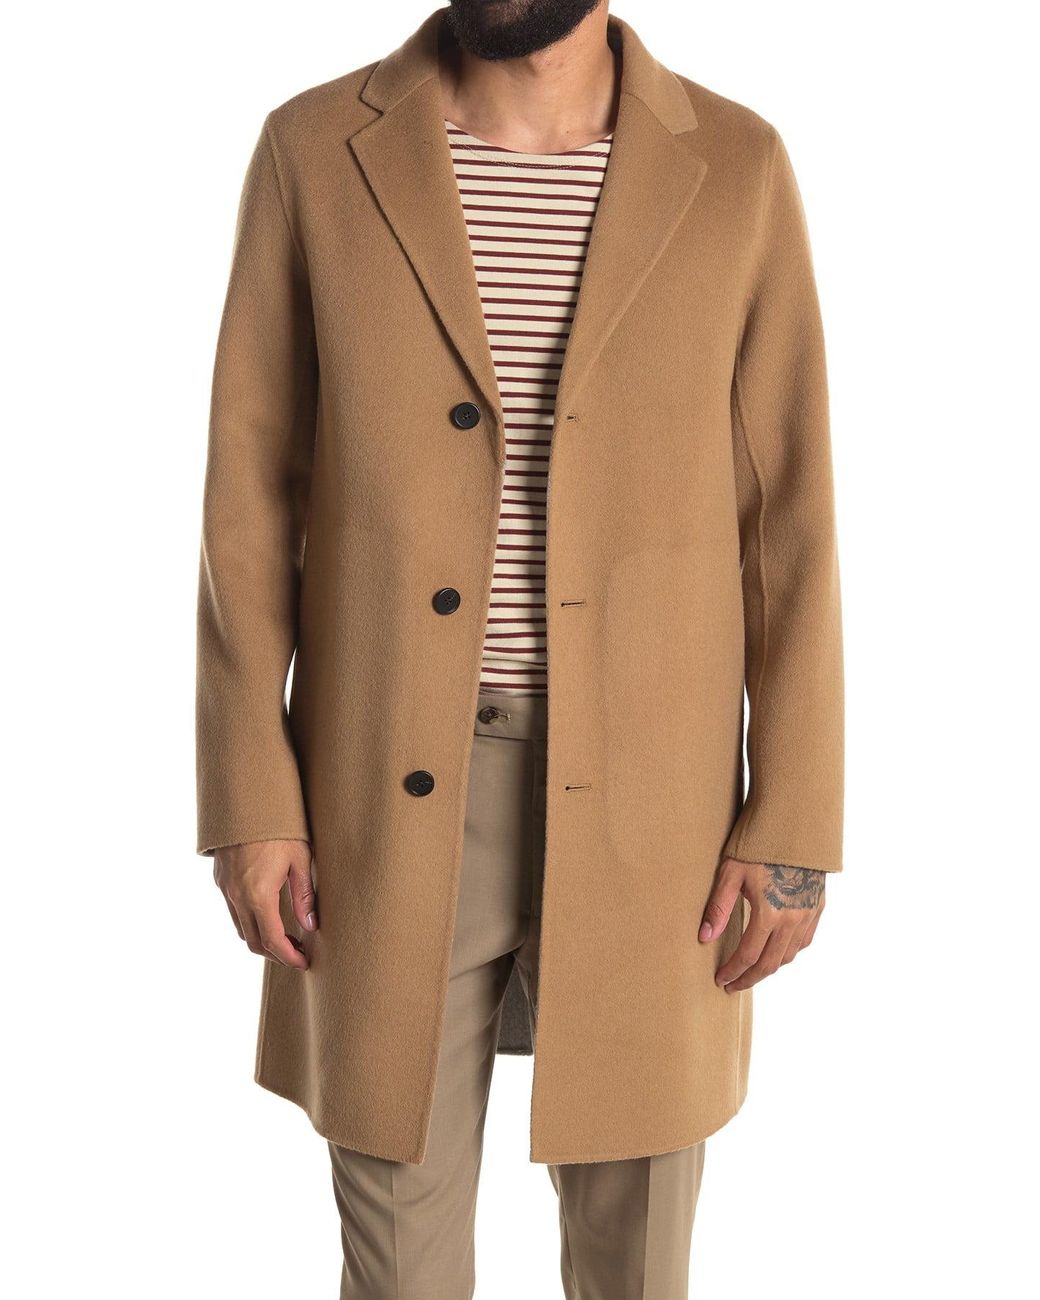 Theory Delancey Double-face Wool Cashmere Tailored Coat for Men - Lyst